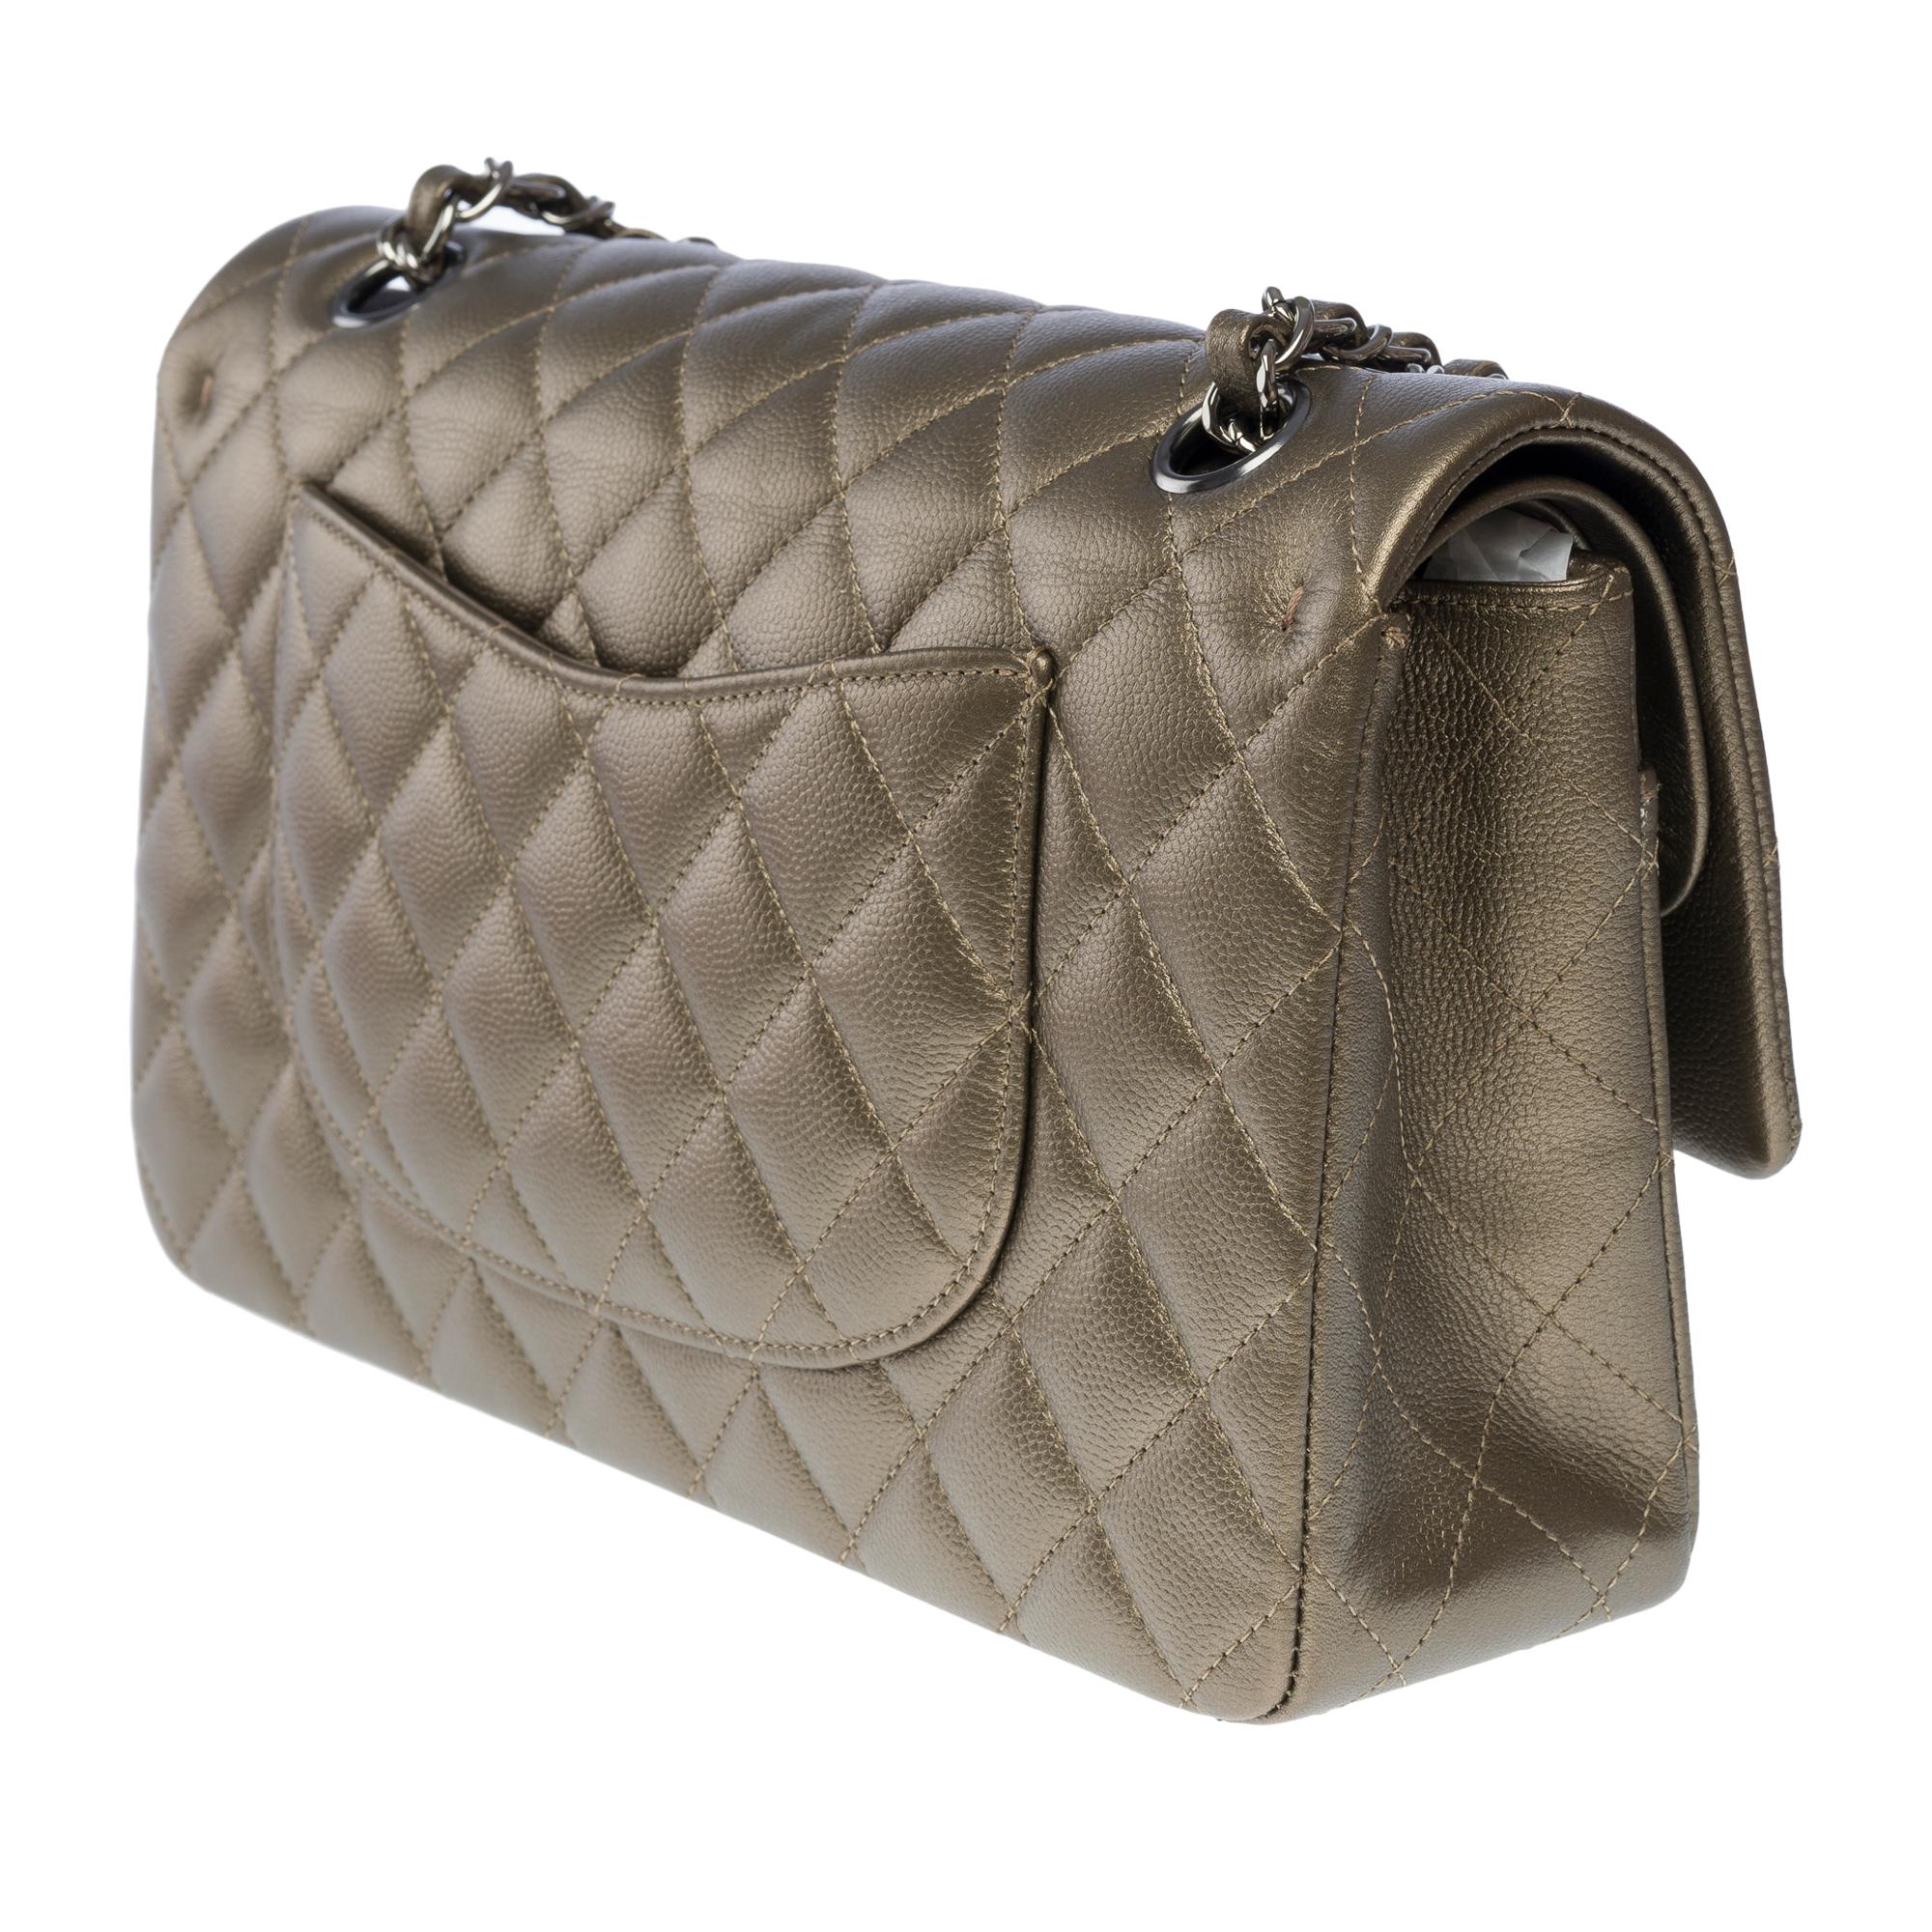 Chanel Timeless double flap shoulder bag in Bronze caviar quilted leather, SHW 2